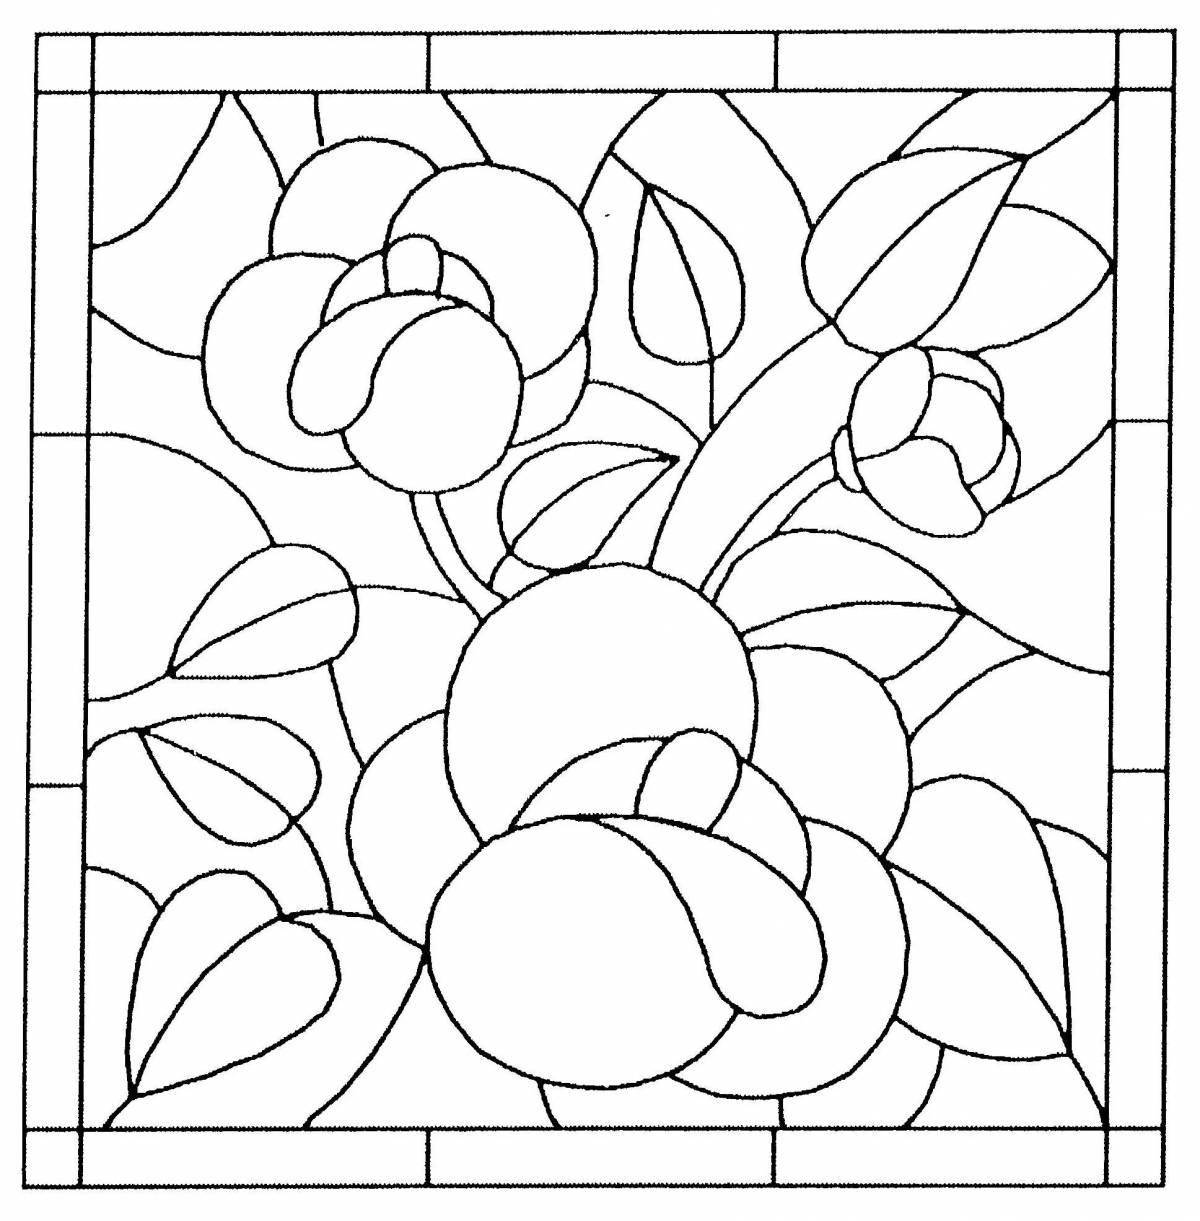 Creative coloring for stained glass paints